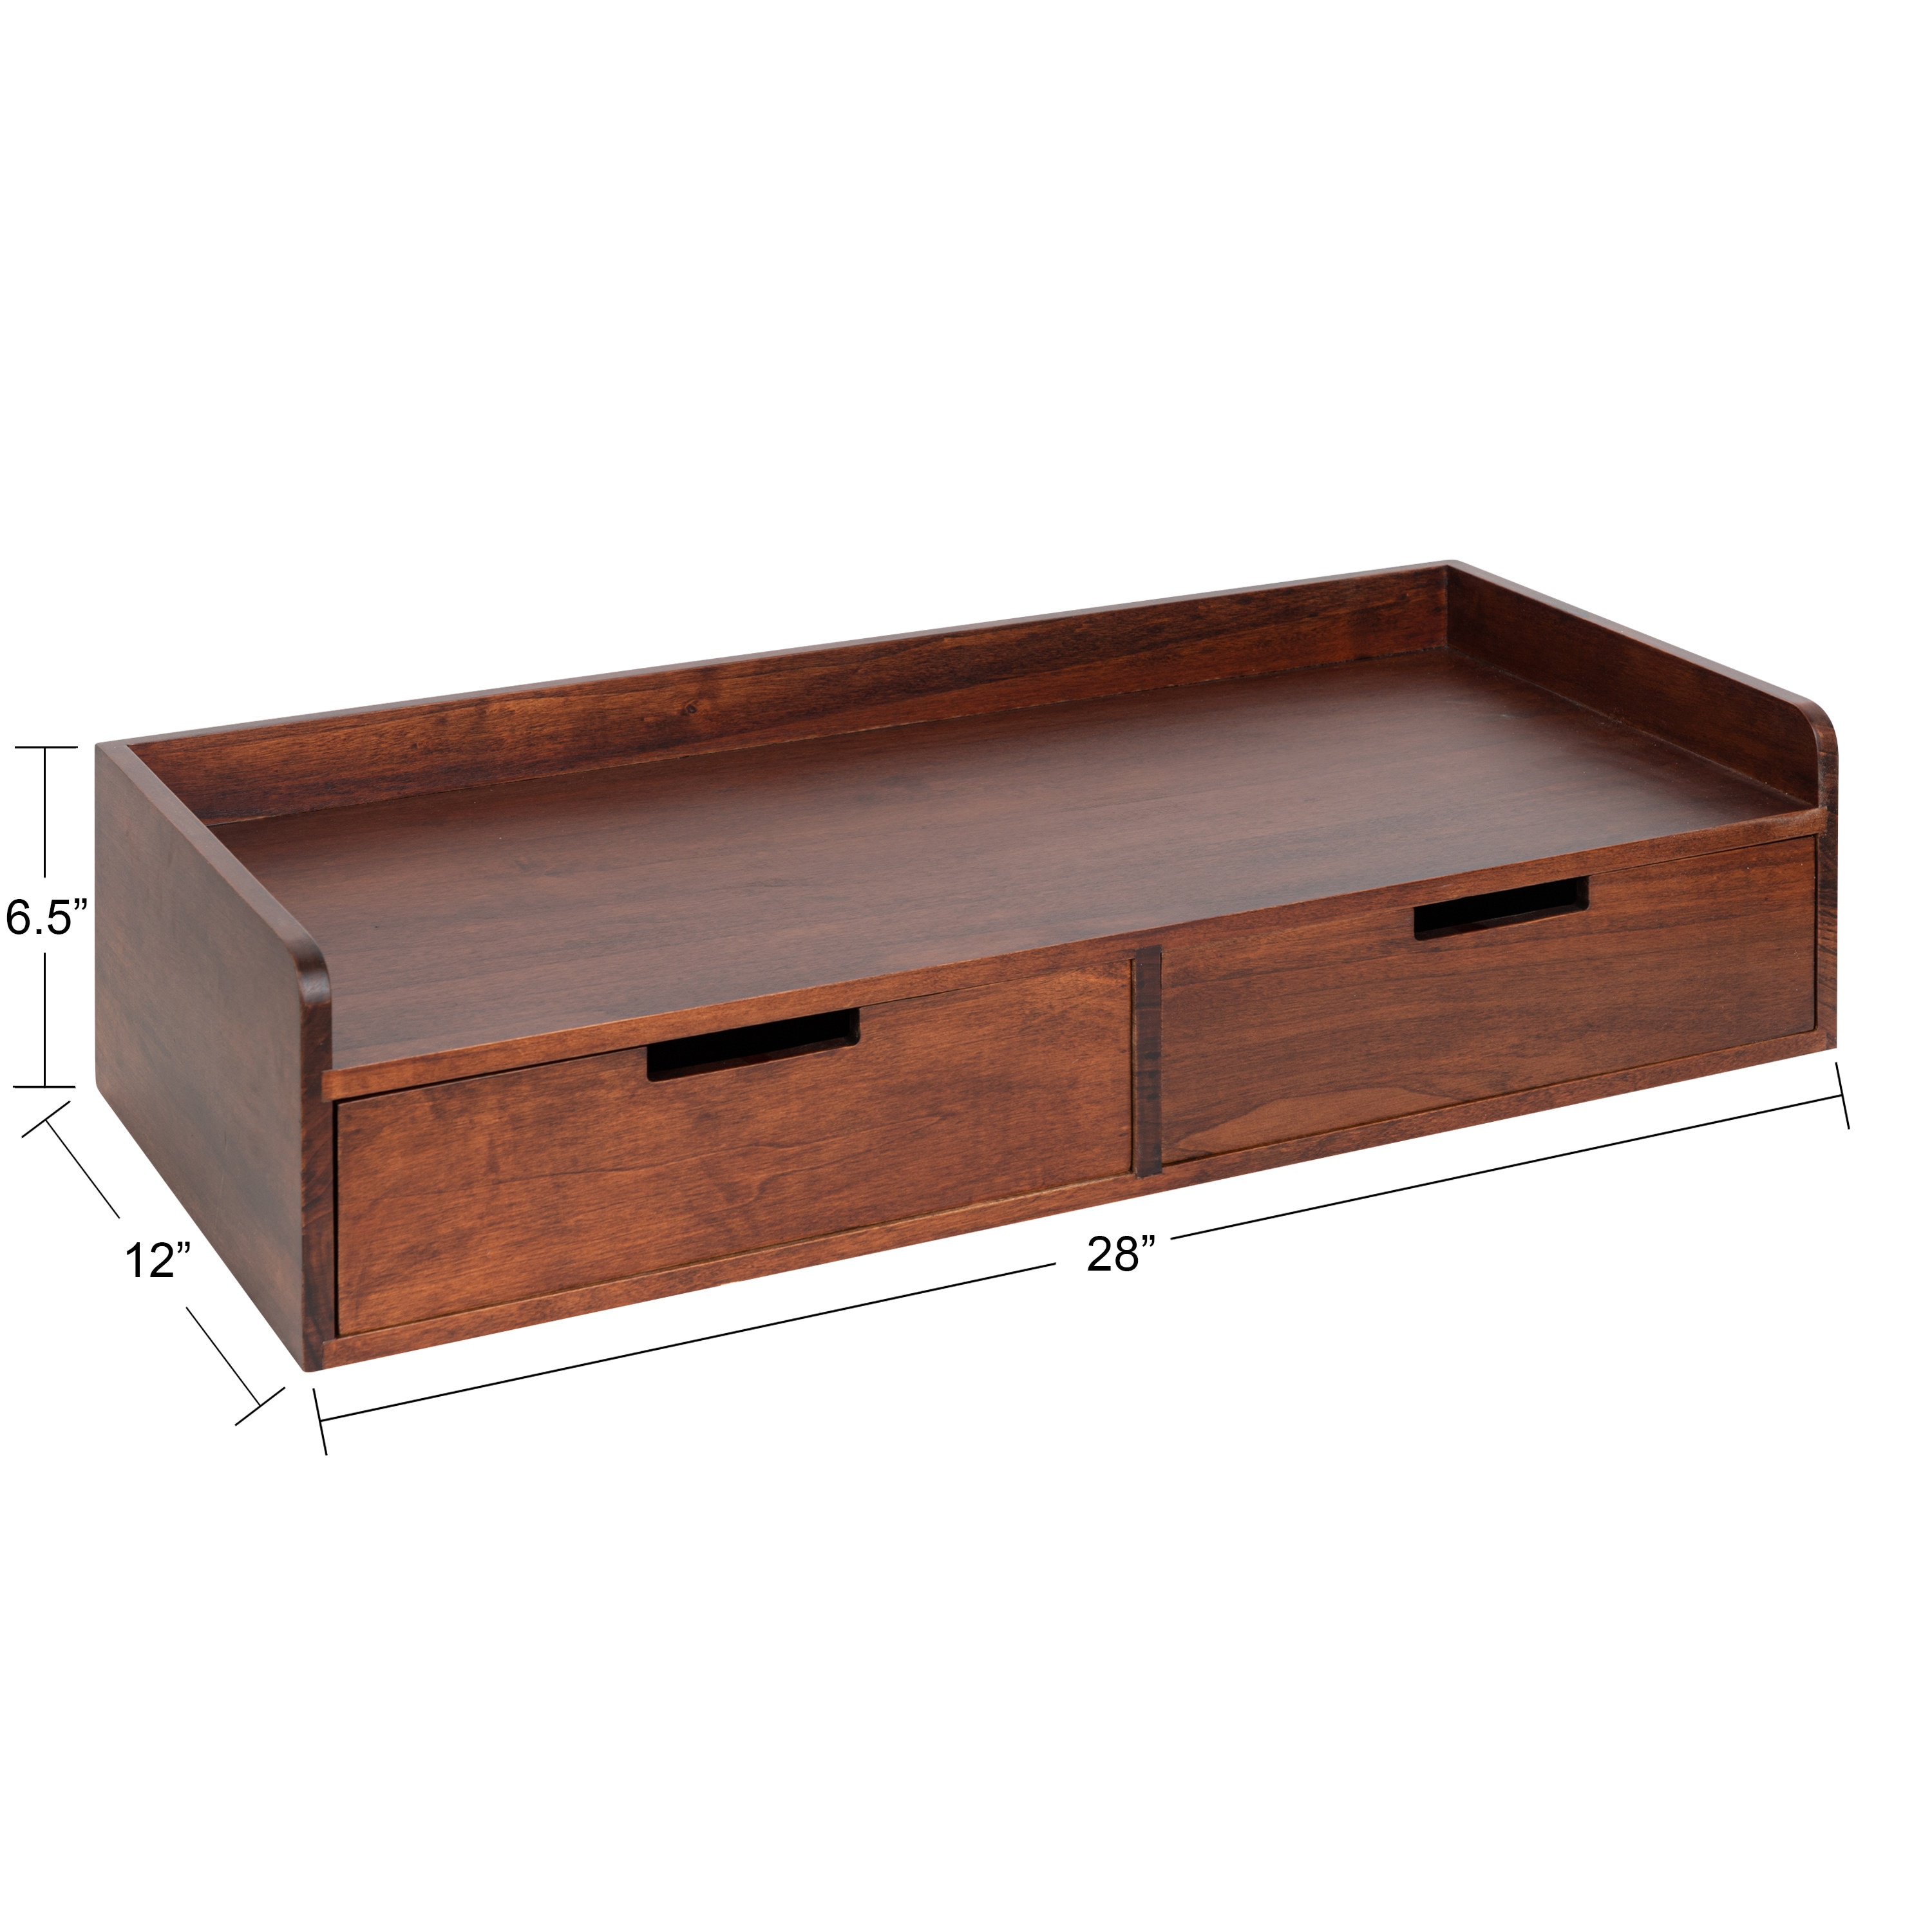 Kate and Laurel 28-in L x 12-in D x 6.5-in H Walnut Brown Wood ...